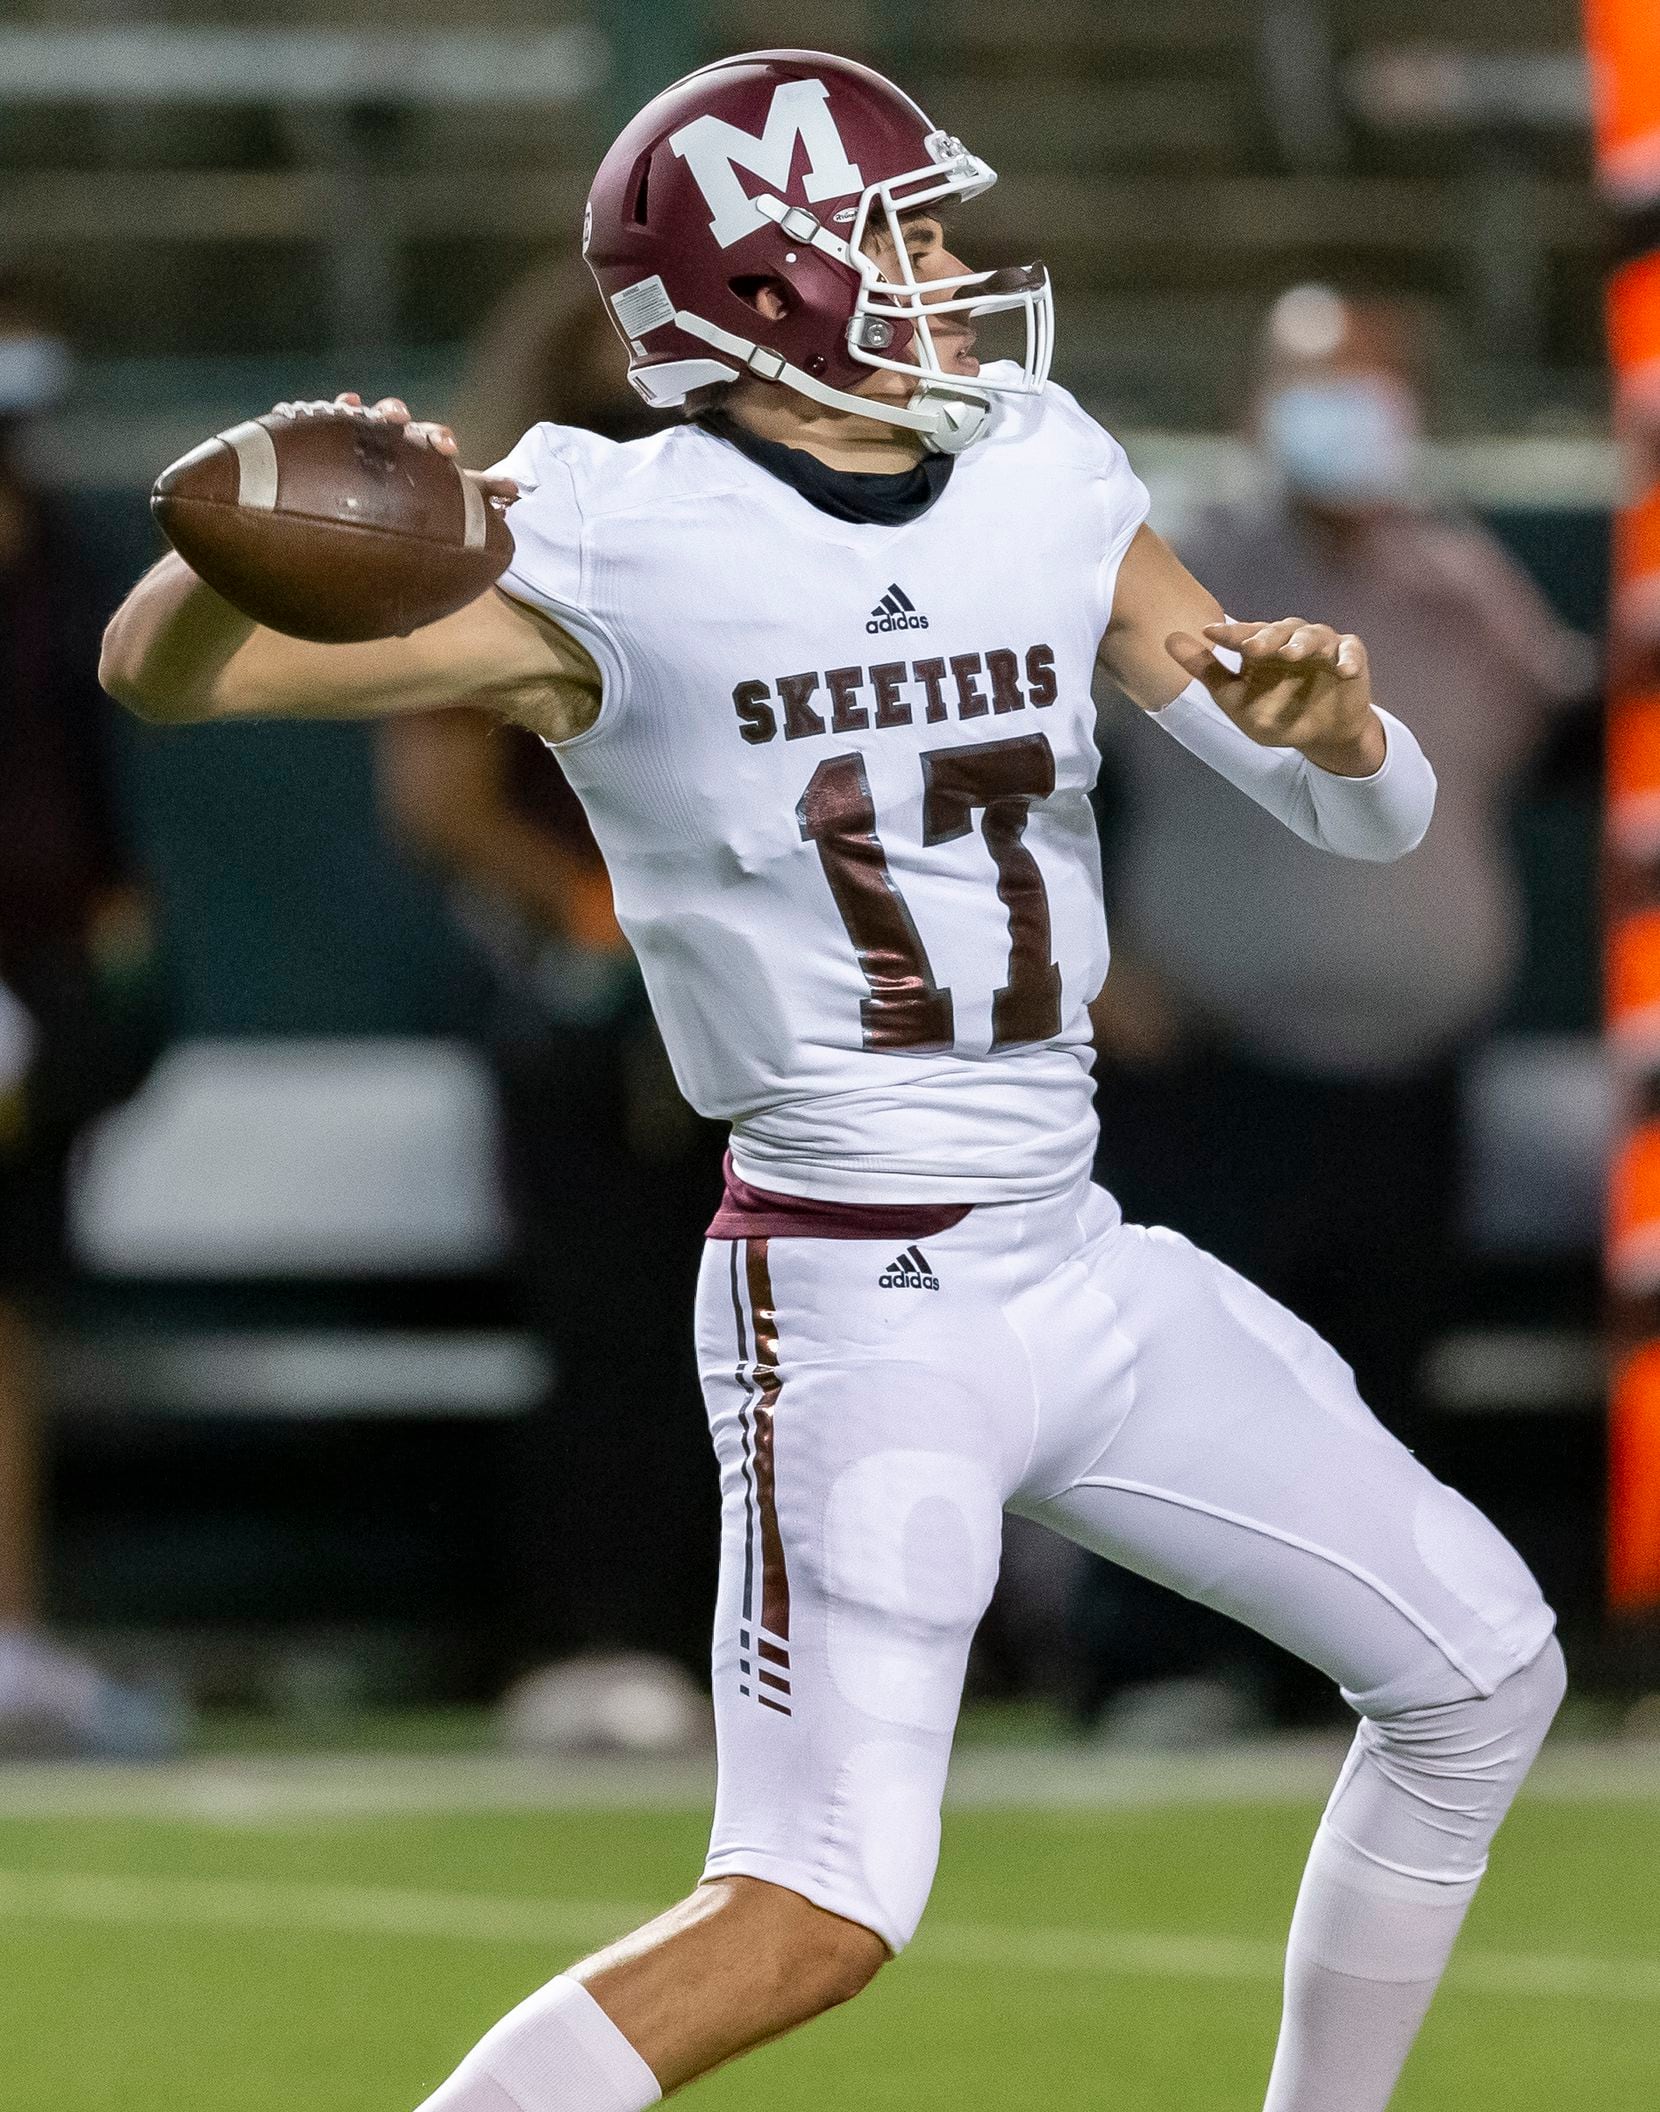 Mesquite senior quarterback Hunter Nucci (19) throws during the first half of a high school...